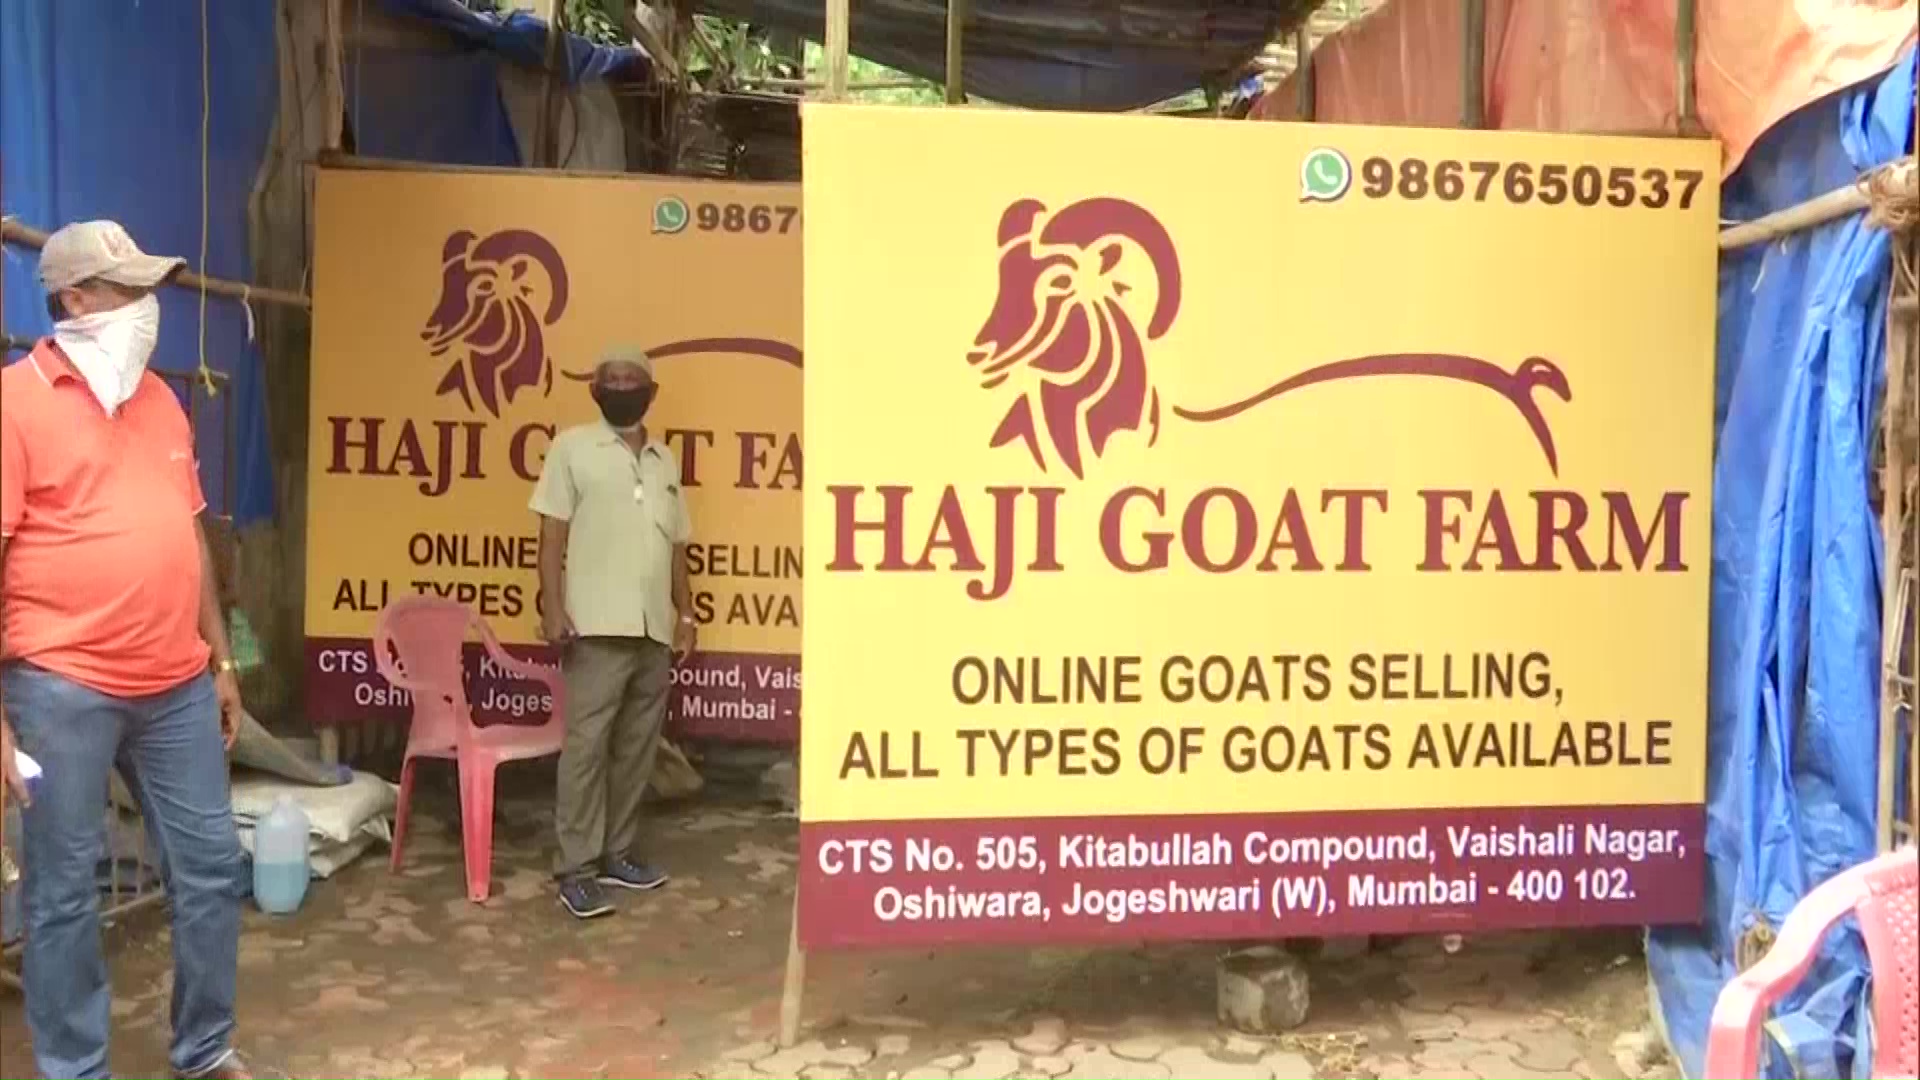 Goats sold online for Eid ul-Adha in Mumbai